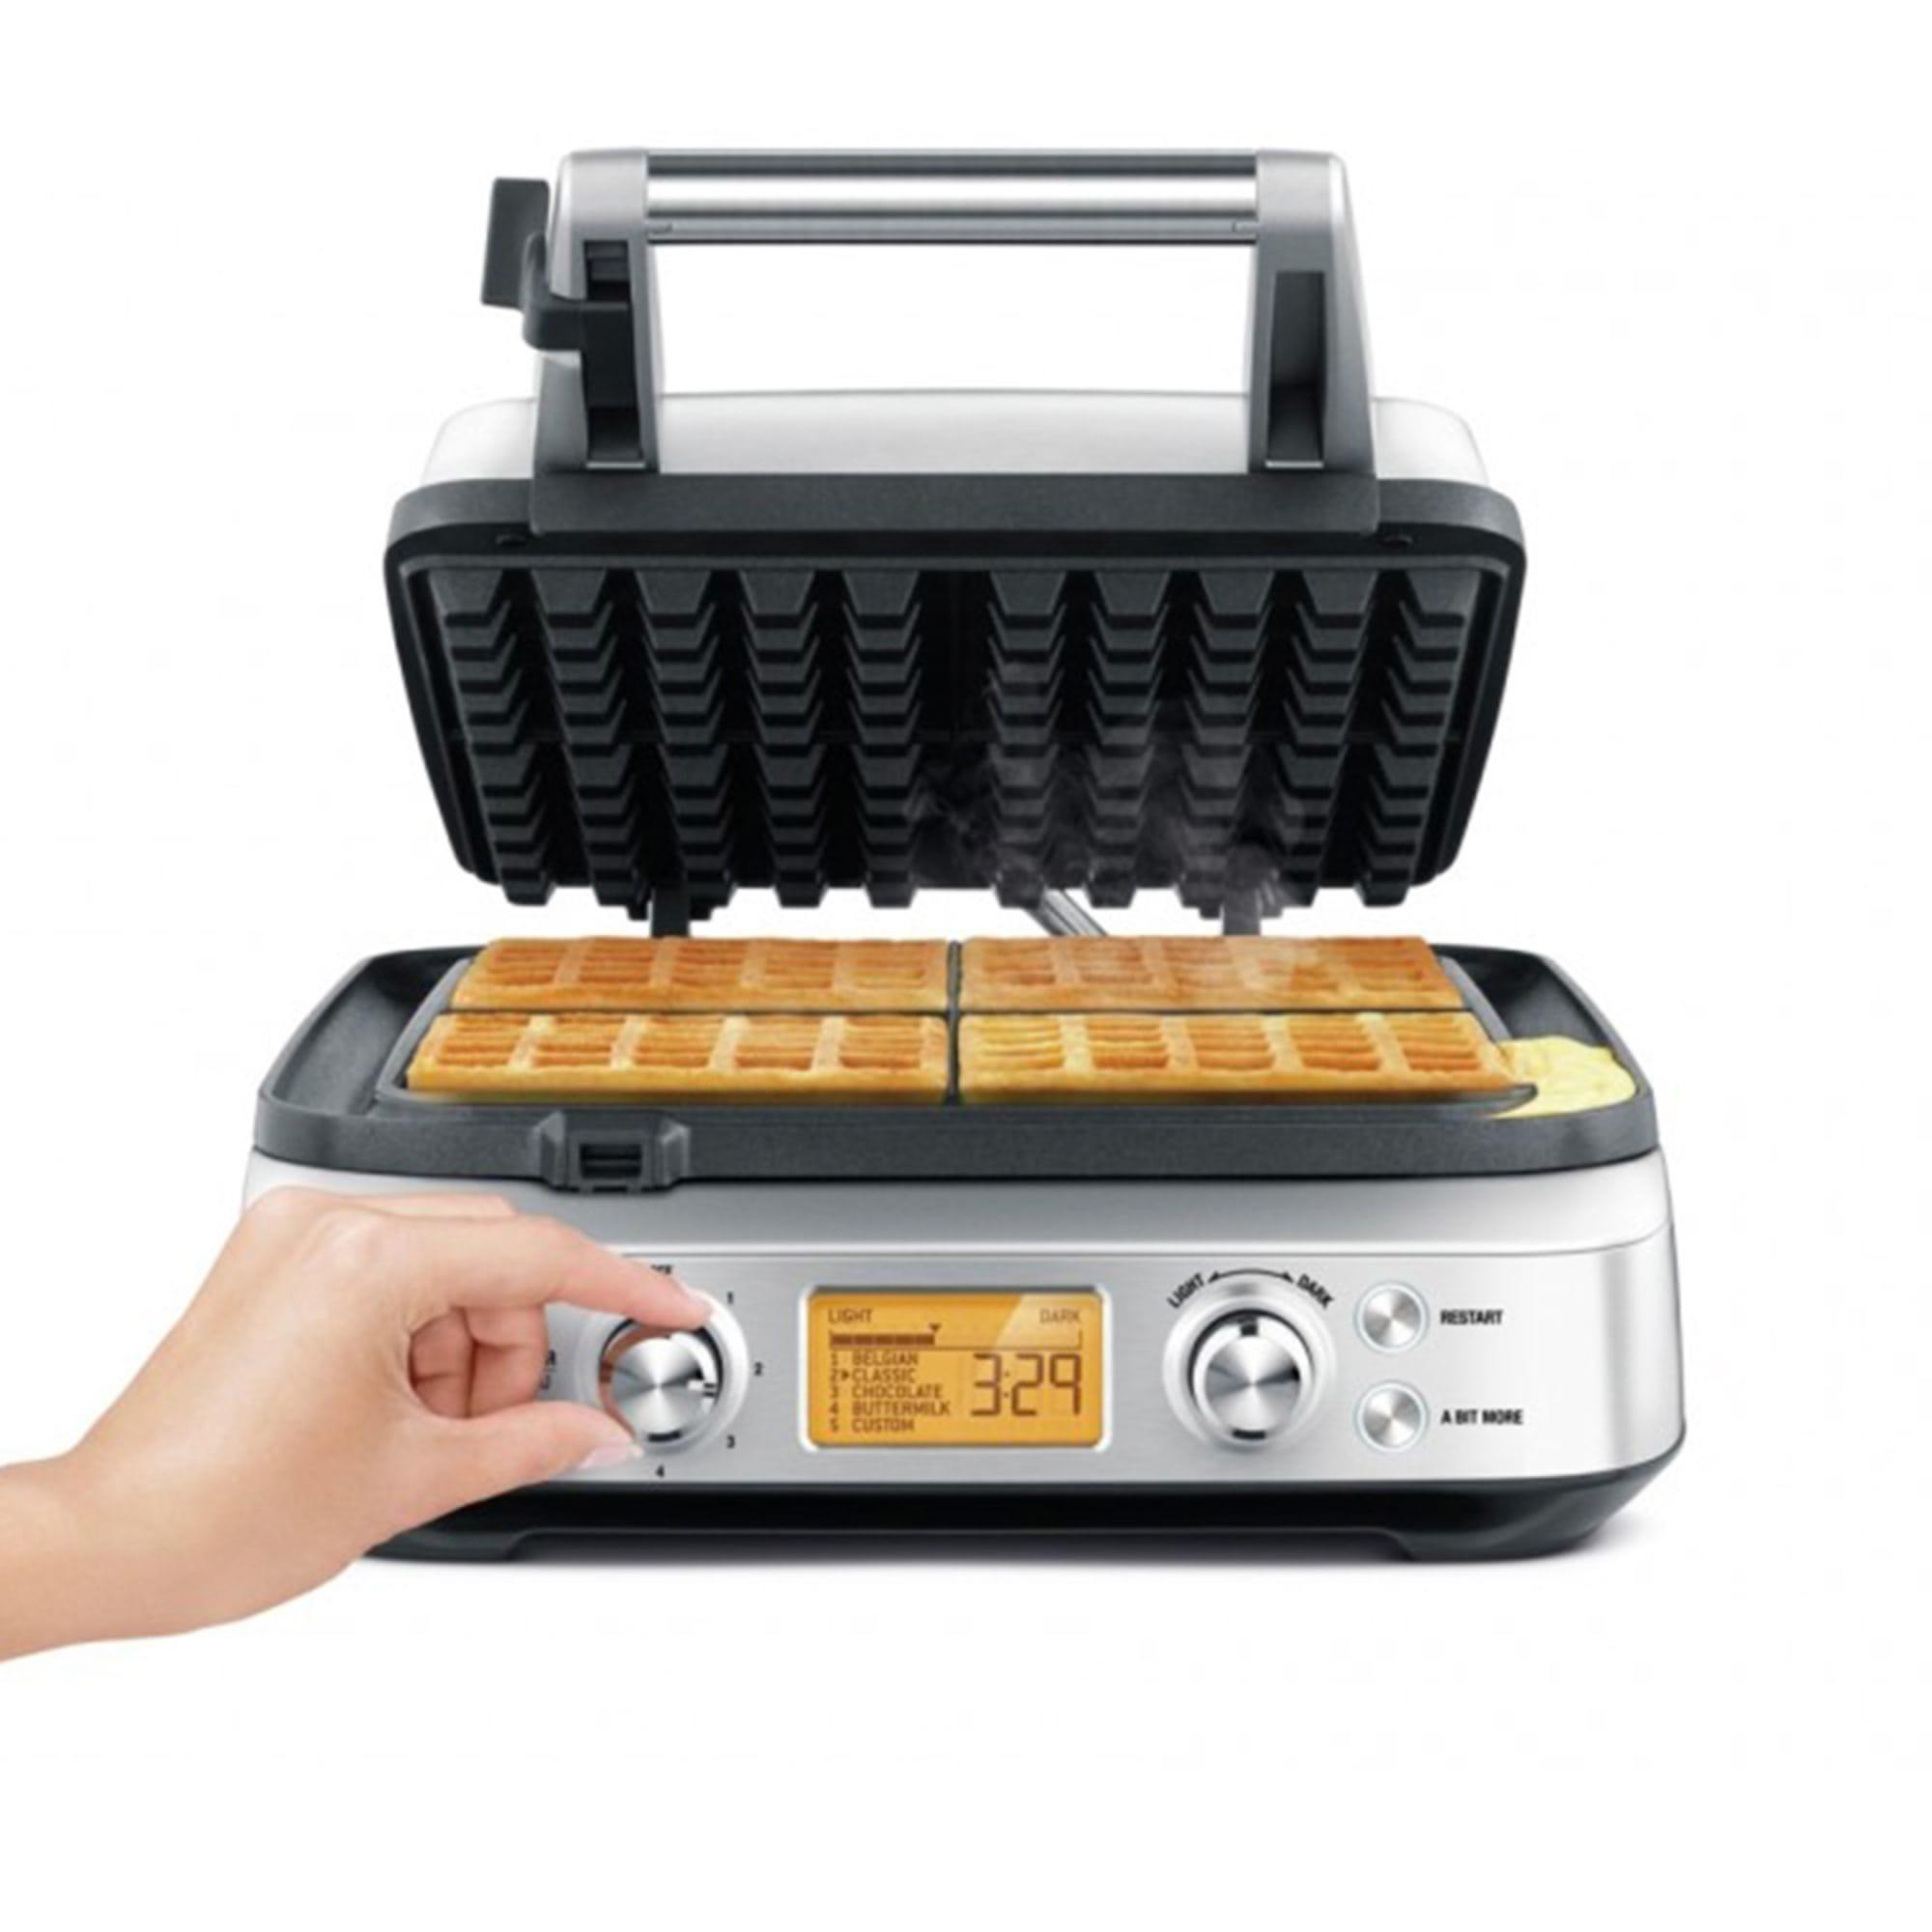 Breville The No Mess Waffle Maker Brushed Stainless Steel Image 4